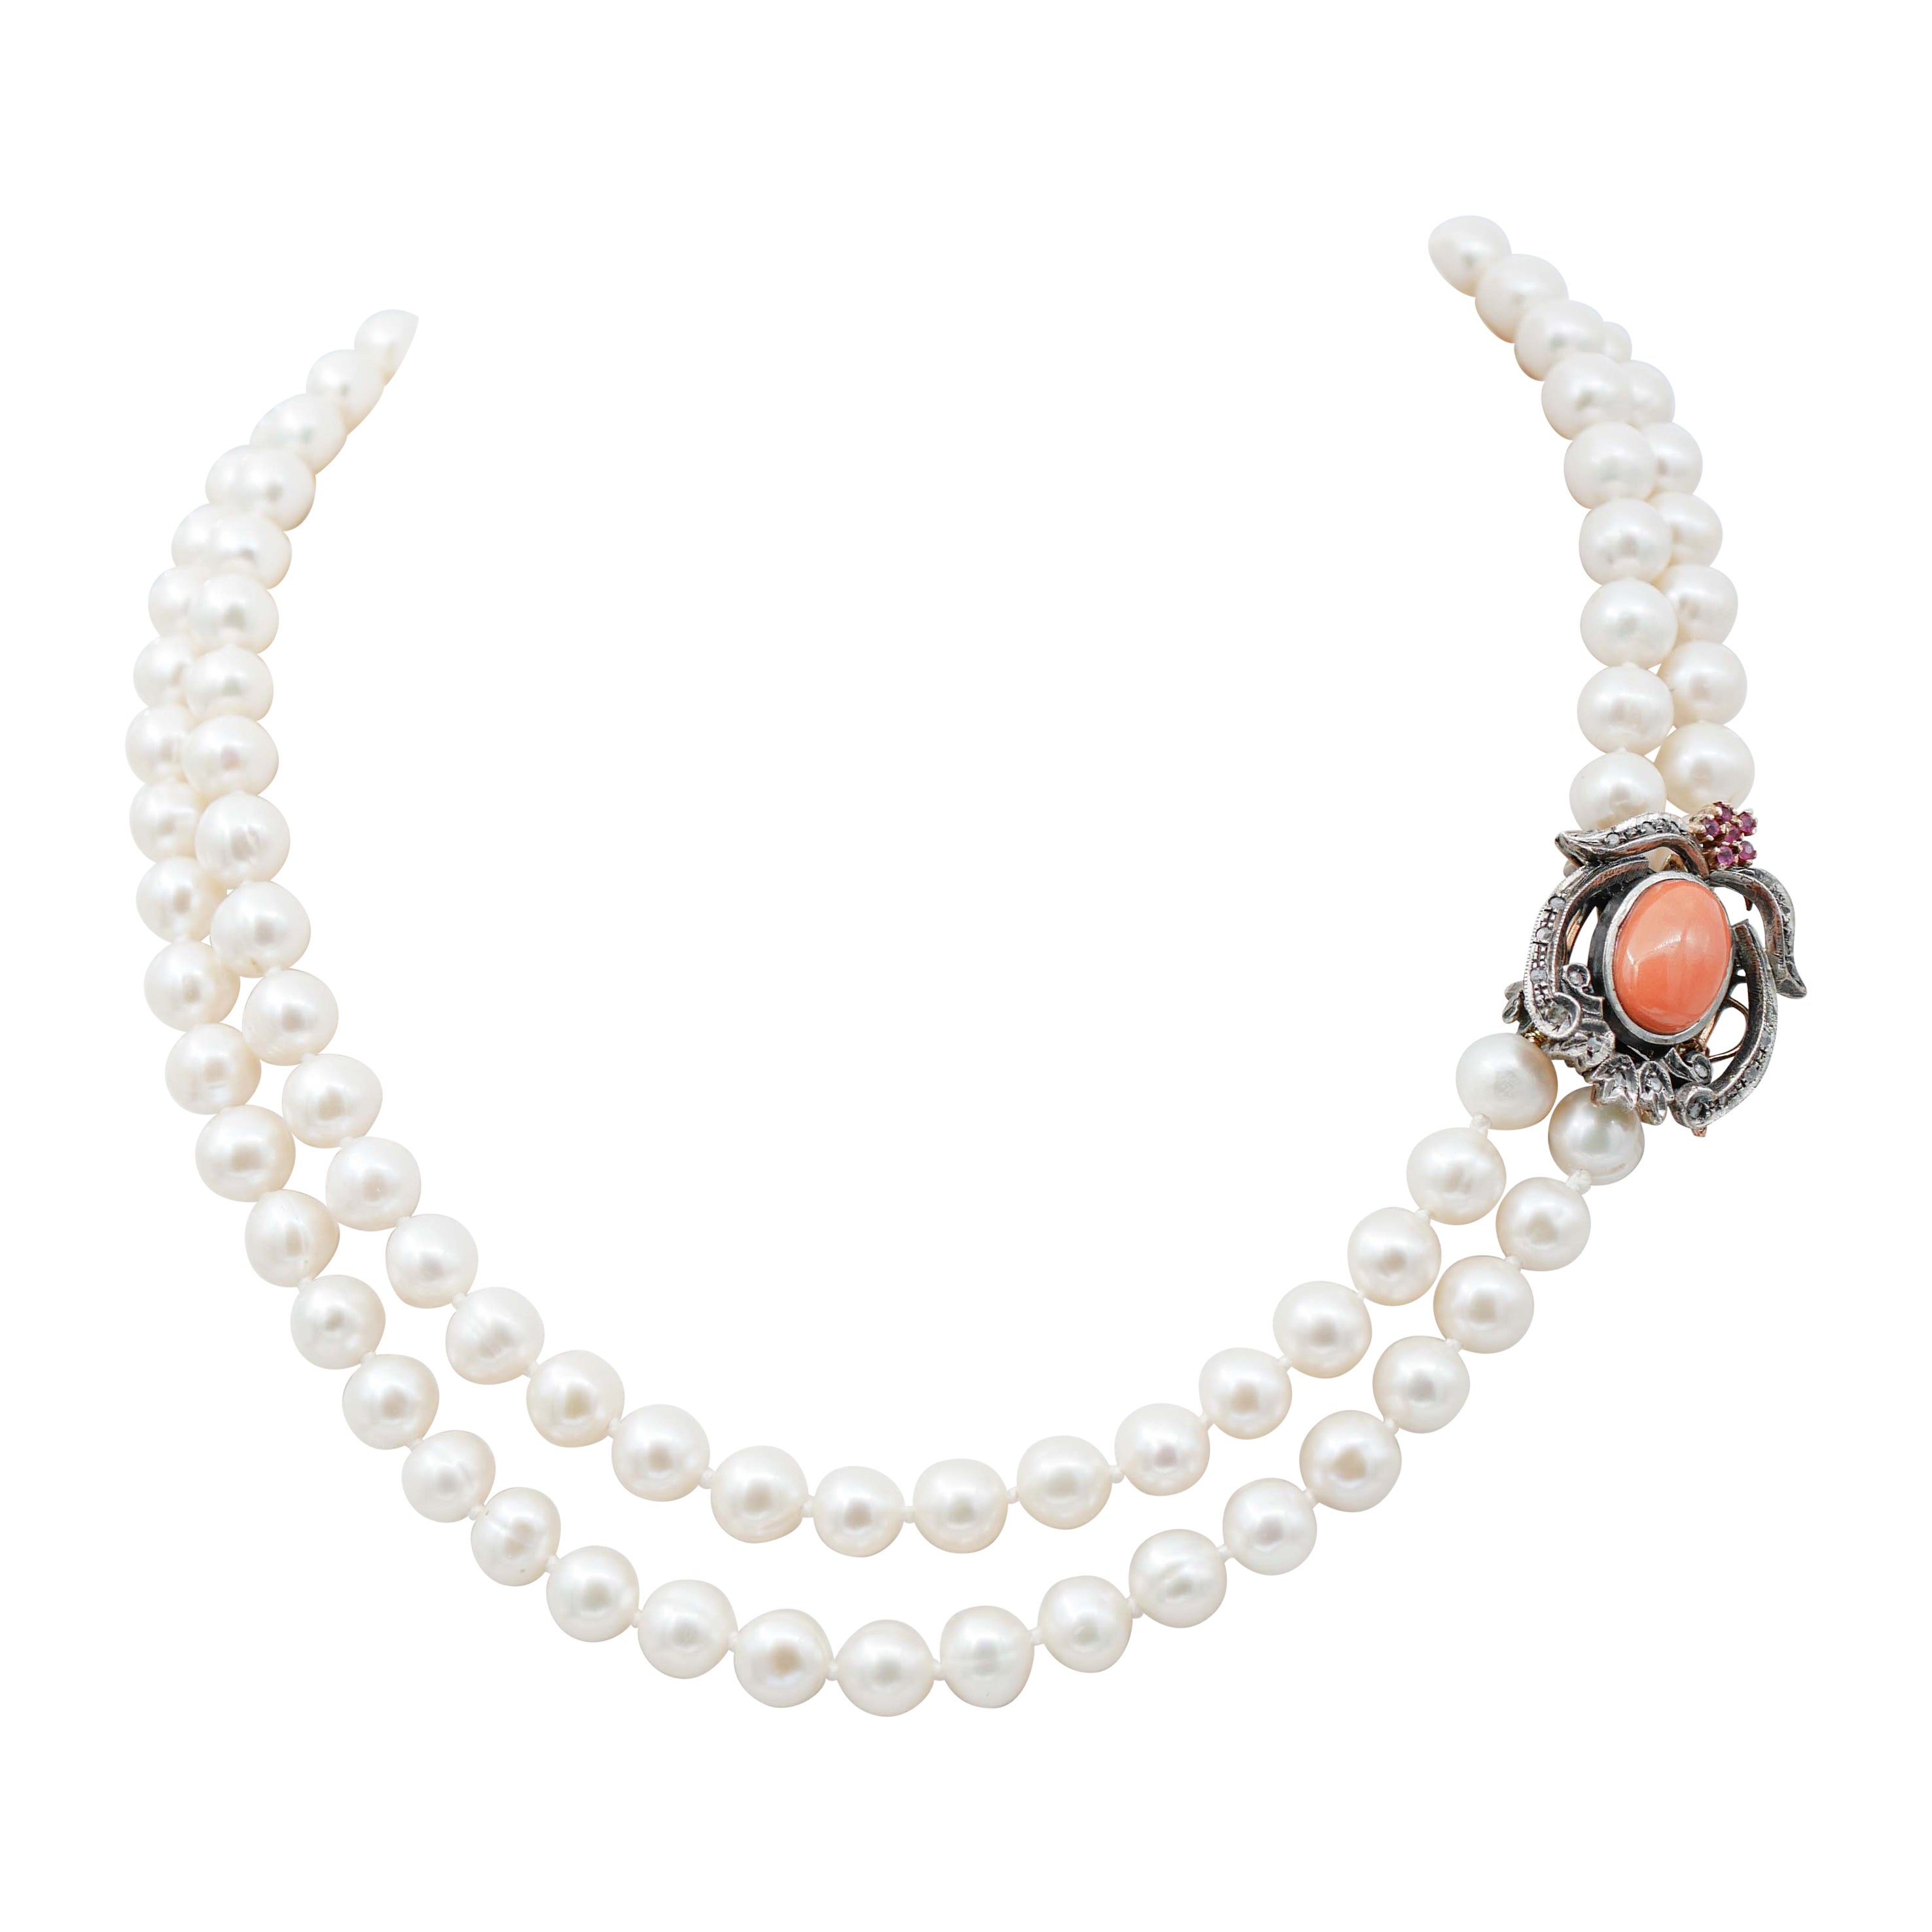 Pearls, Coral, Rubies, Diamonds, 14 Karat Rose Gold and Silver Necklace